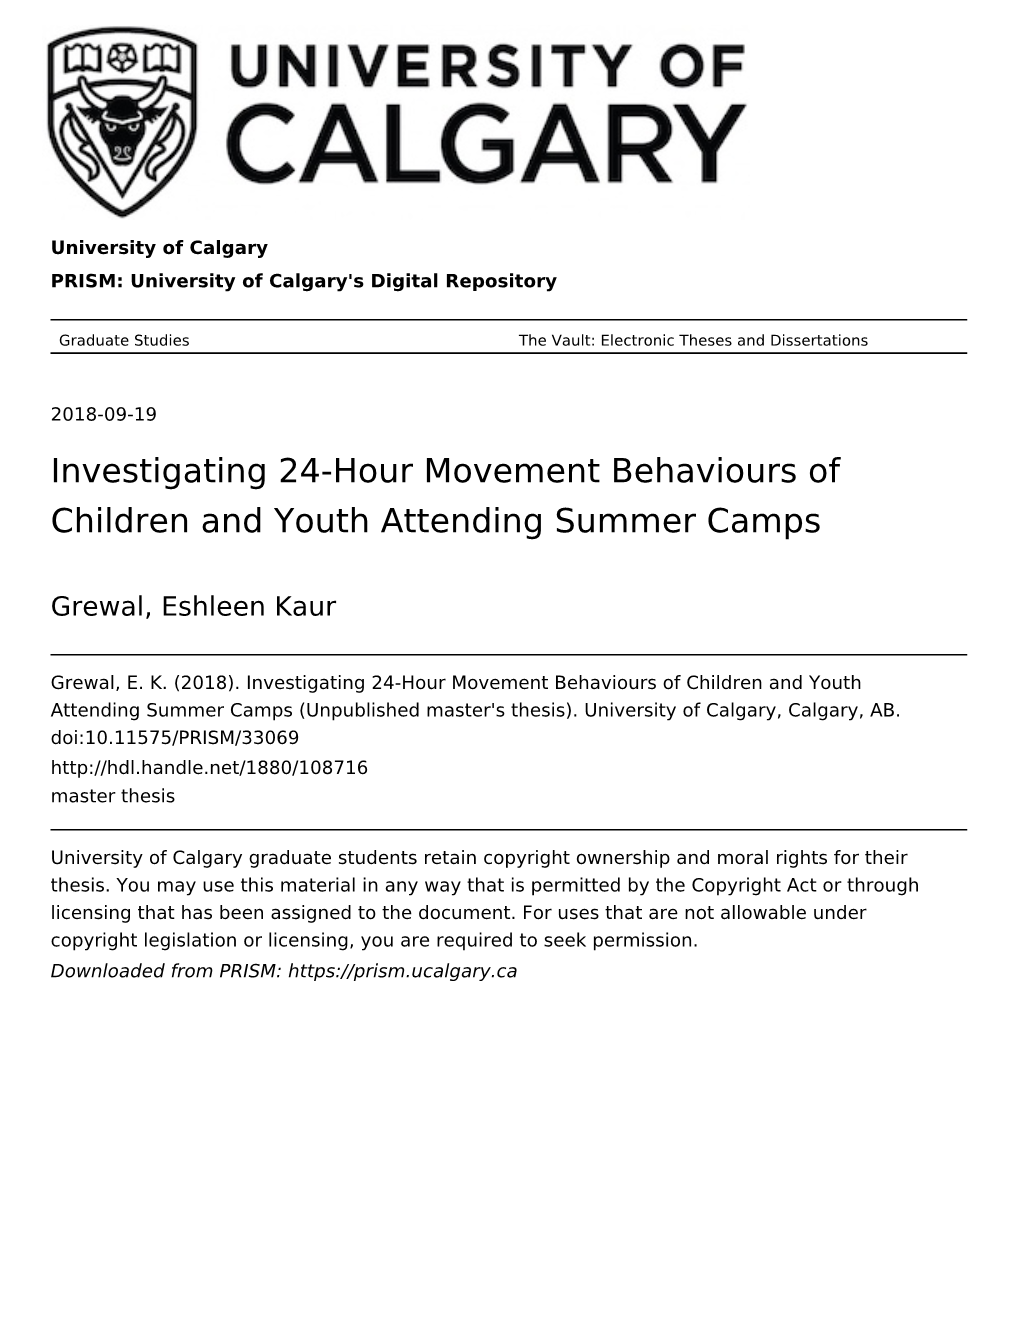 Investigating 24-Hour Movement Behaviours of Children and Youth Attending Summer Camps